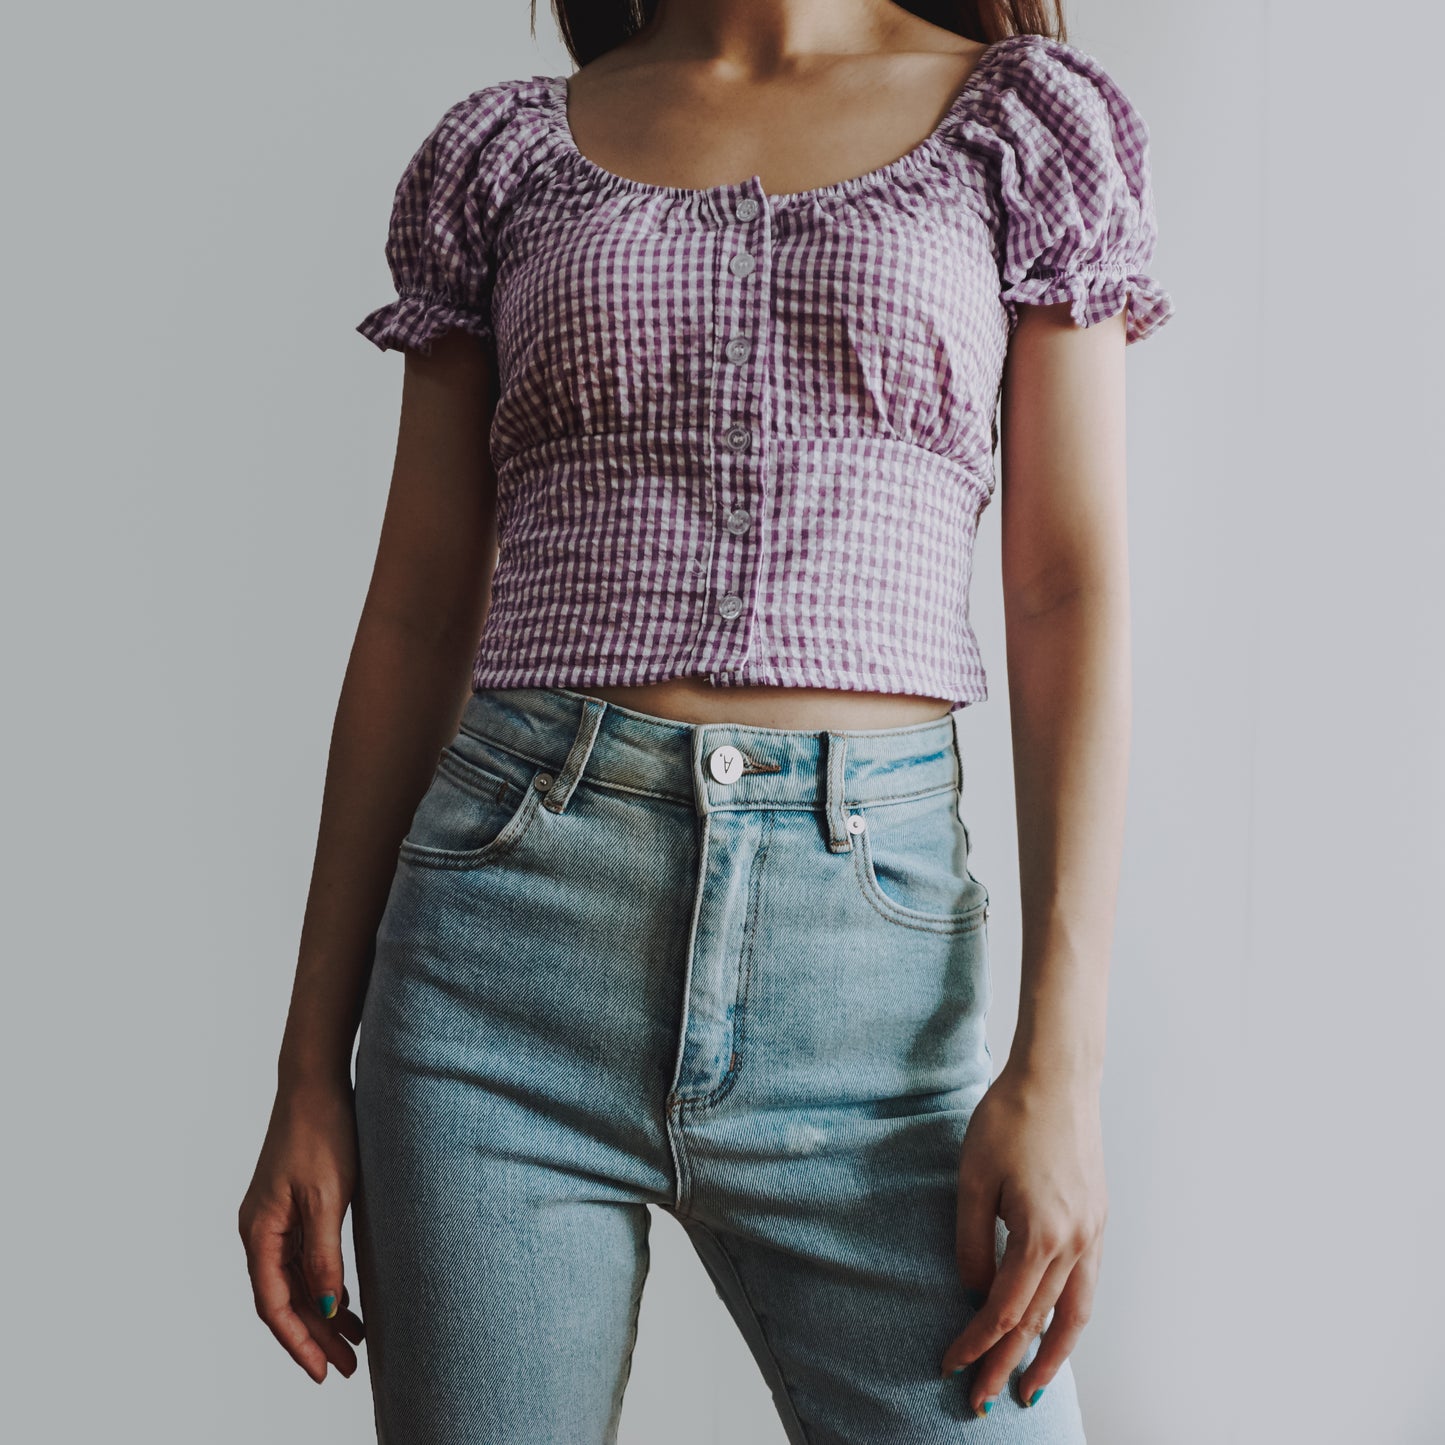 Gingham Puffy Sleeve Crop Top (2 Colors)